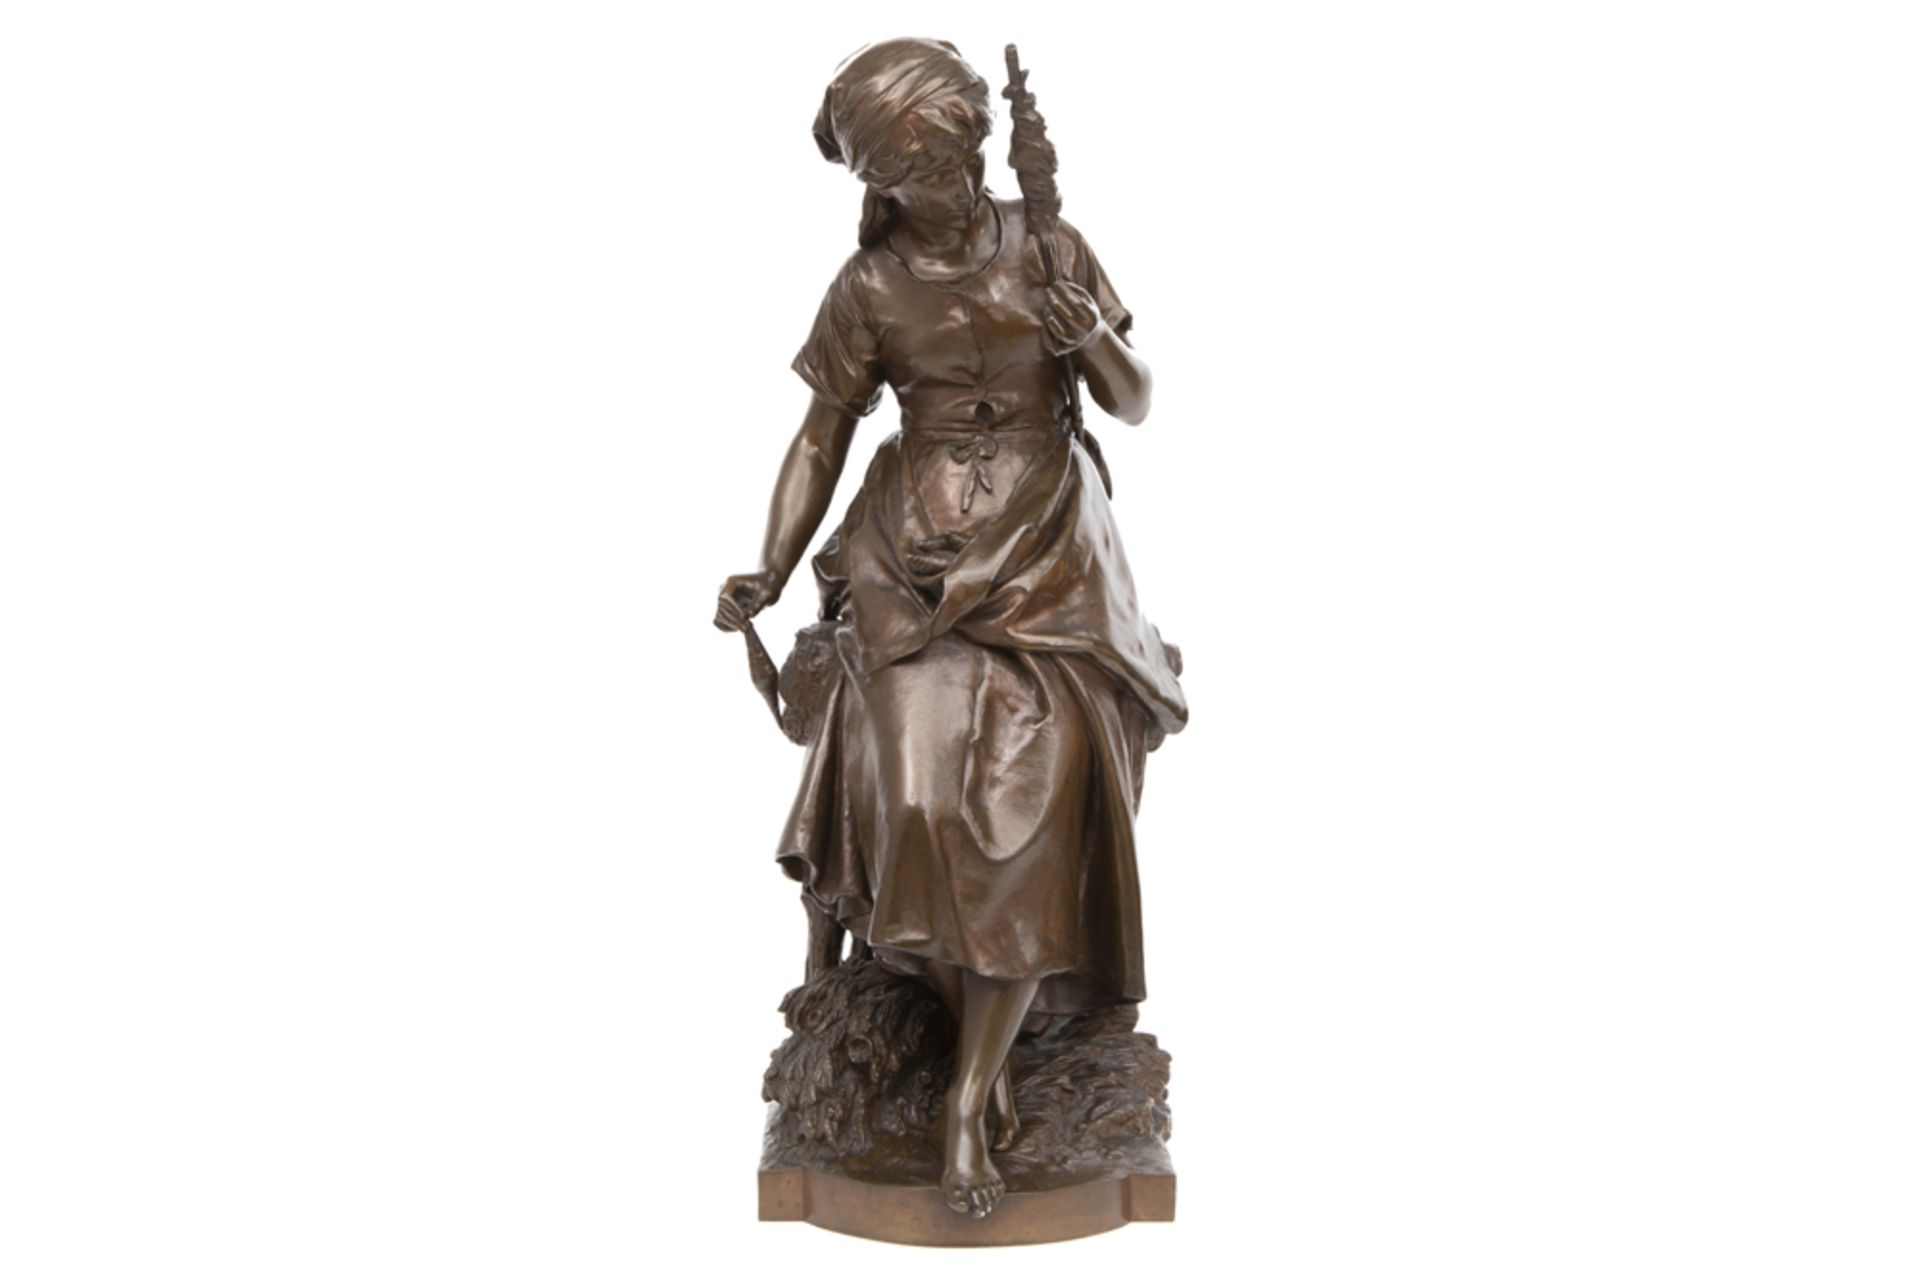 antique Mathurin Moreau signed "Spinster" sculpture in bronze - with a foundry mark || MOREAU